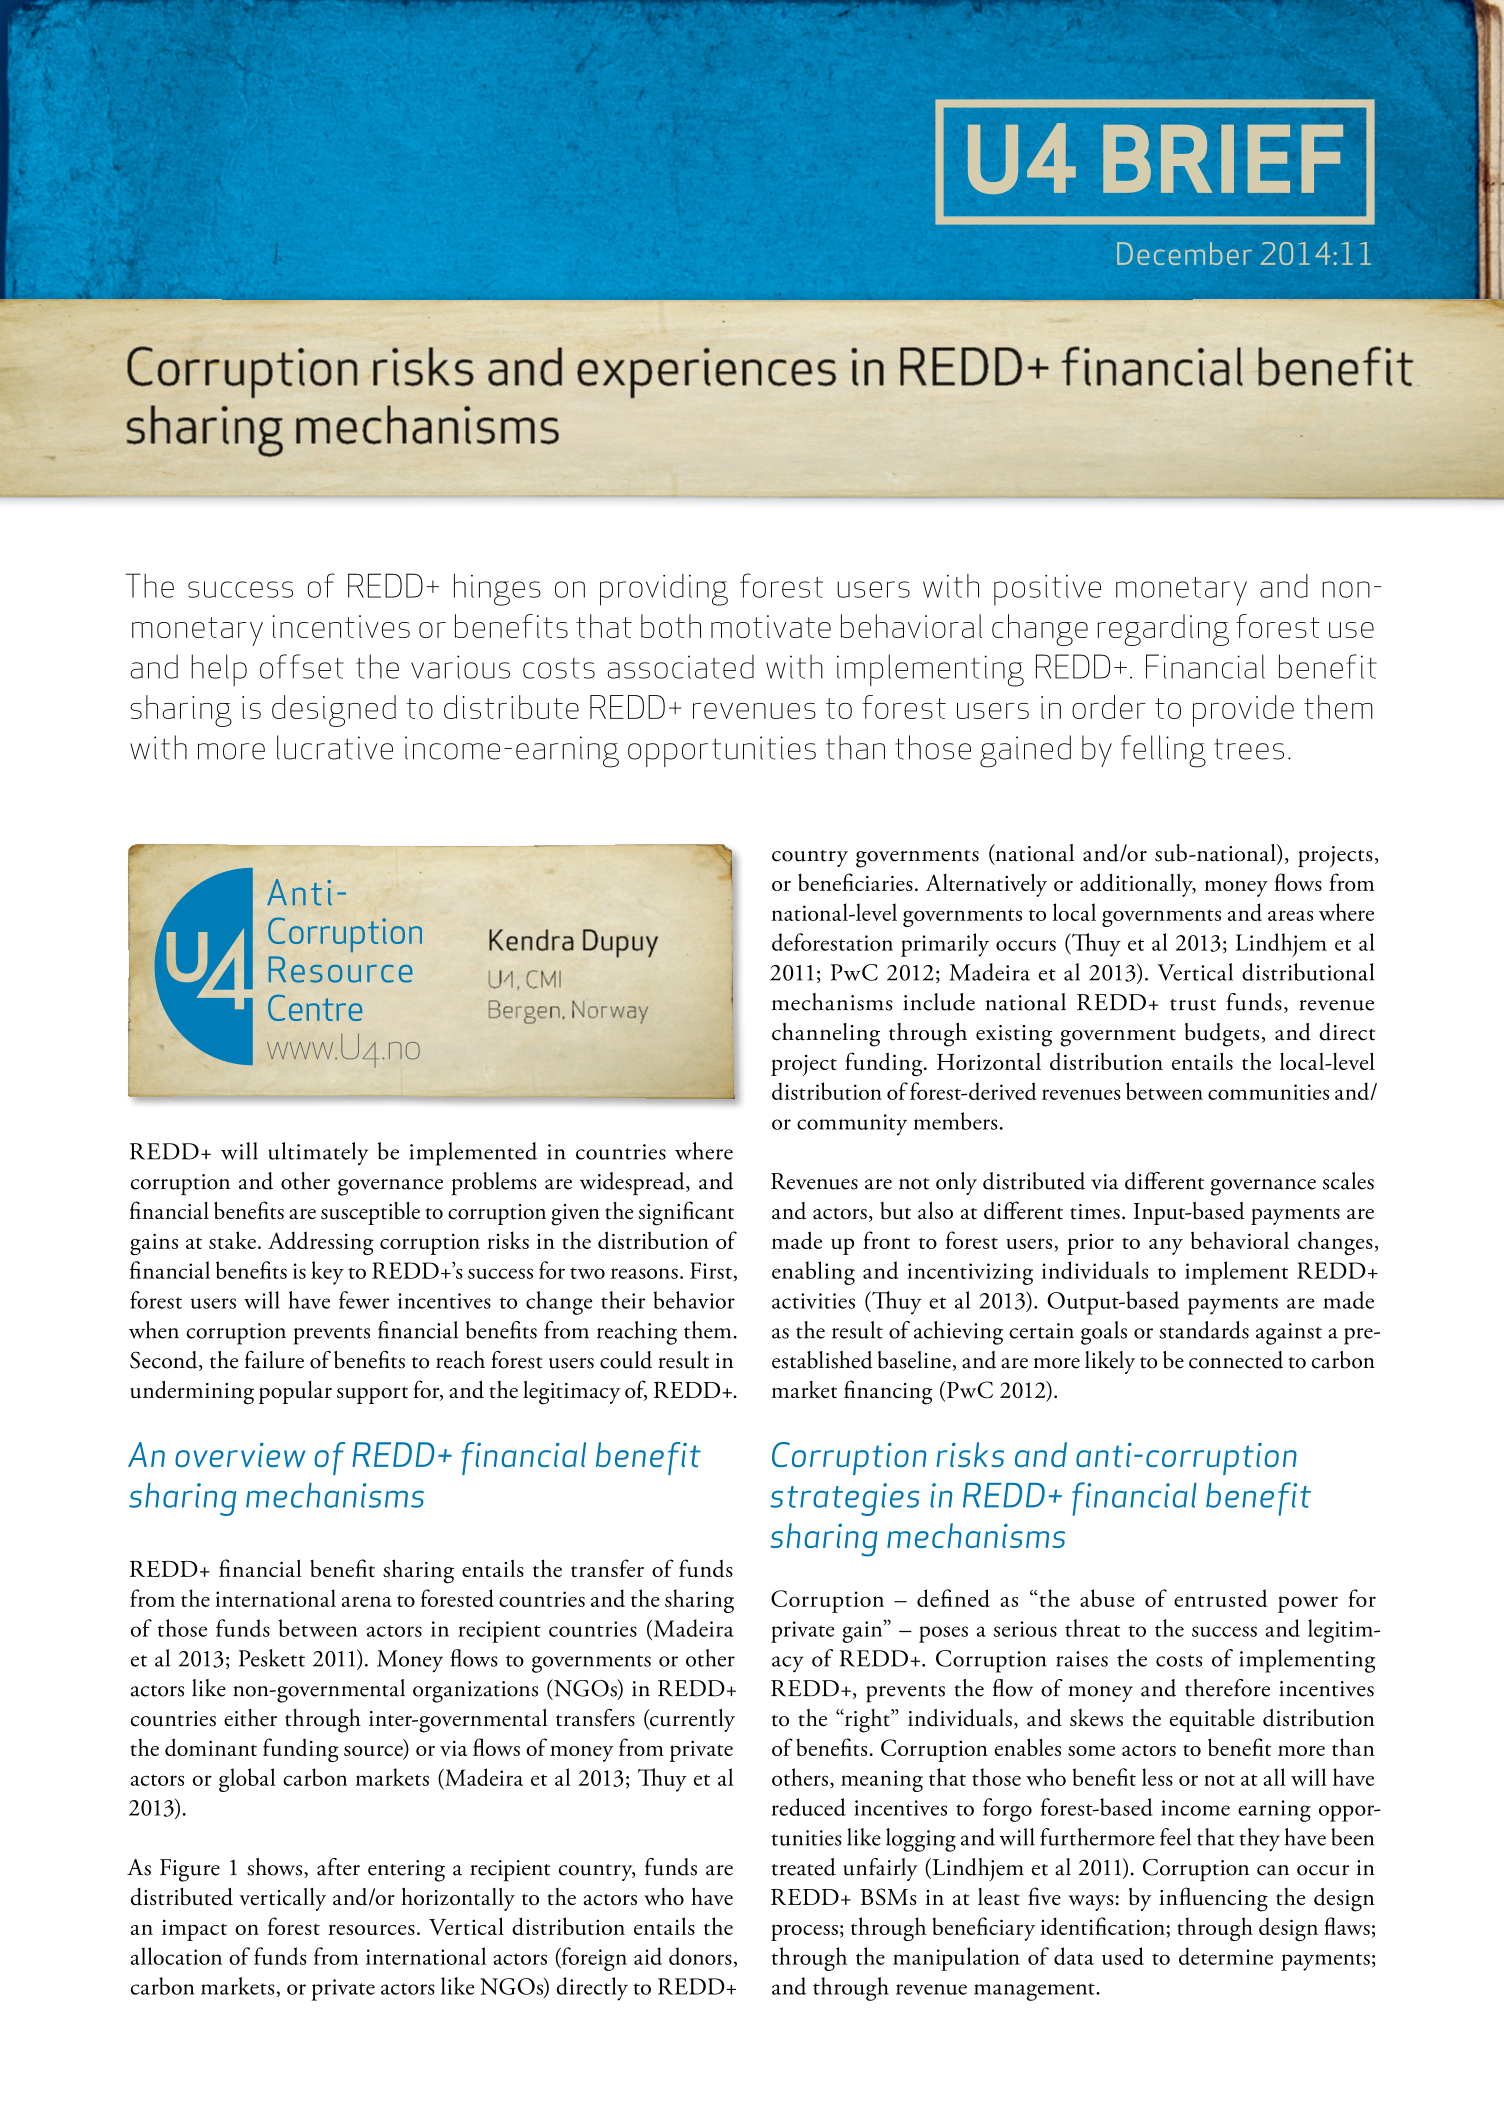 Corruption risks and experiences in REDD+ financial benefit sharing mechanisms